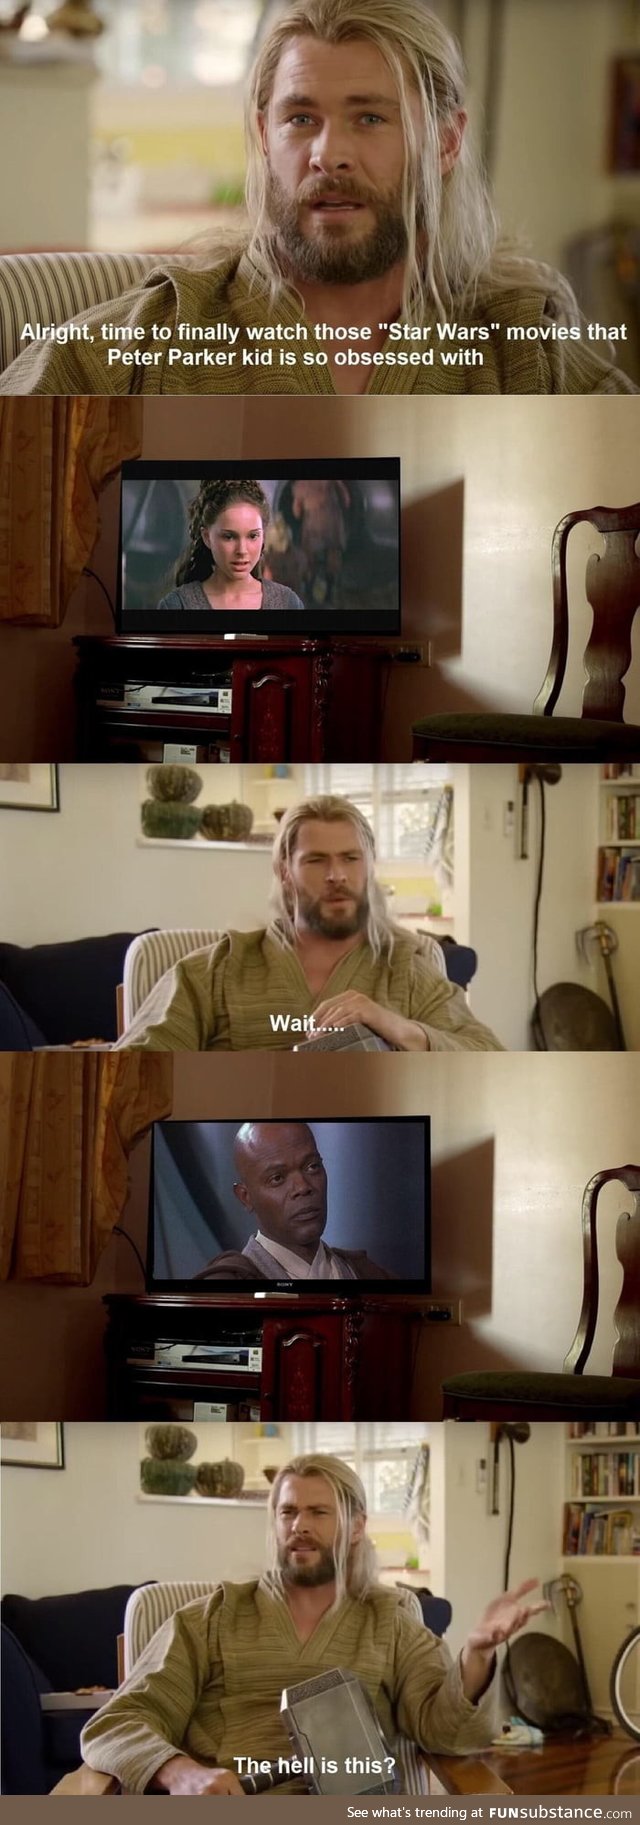 Thor discovers the parallel universe the first time